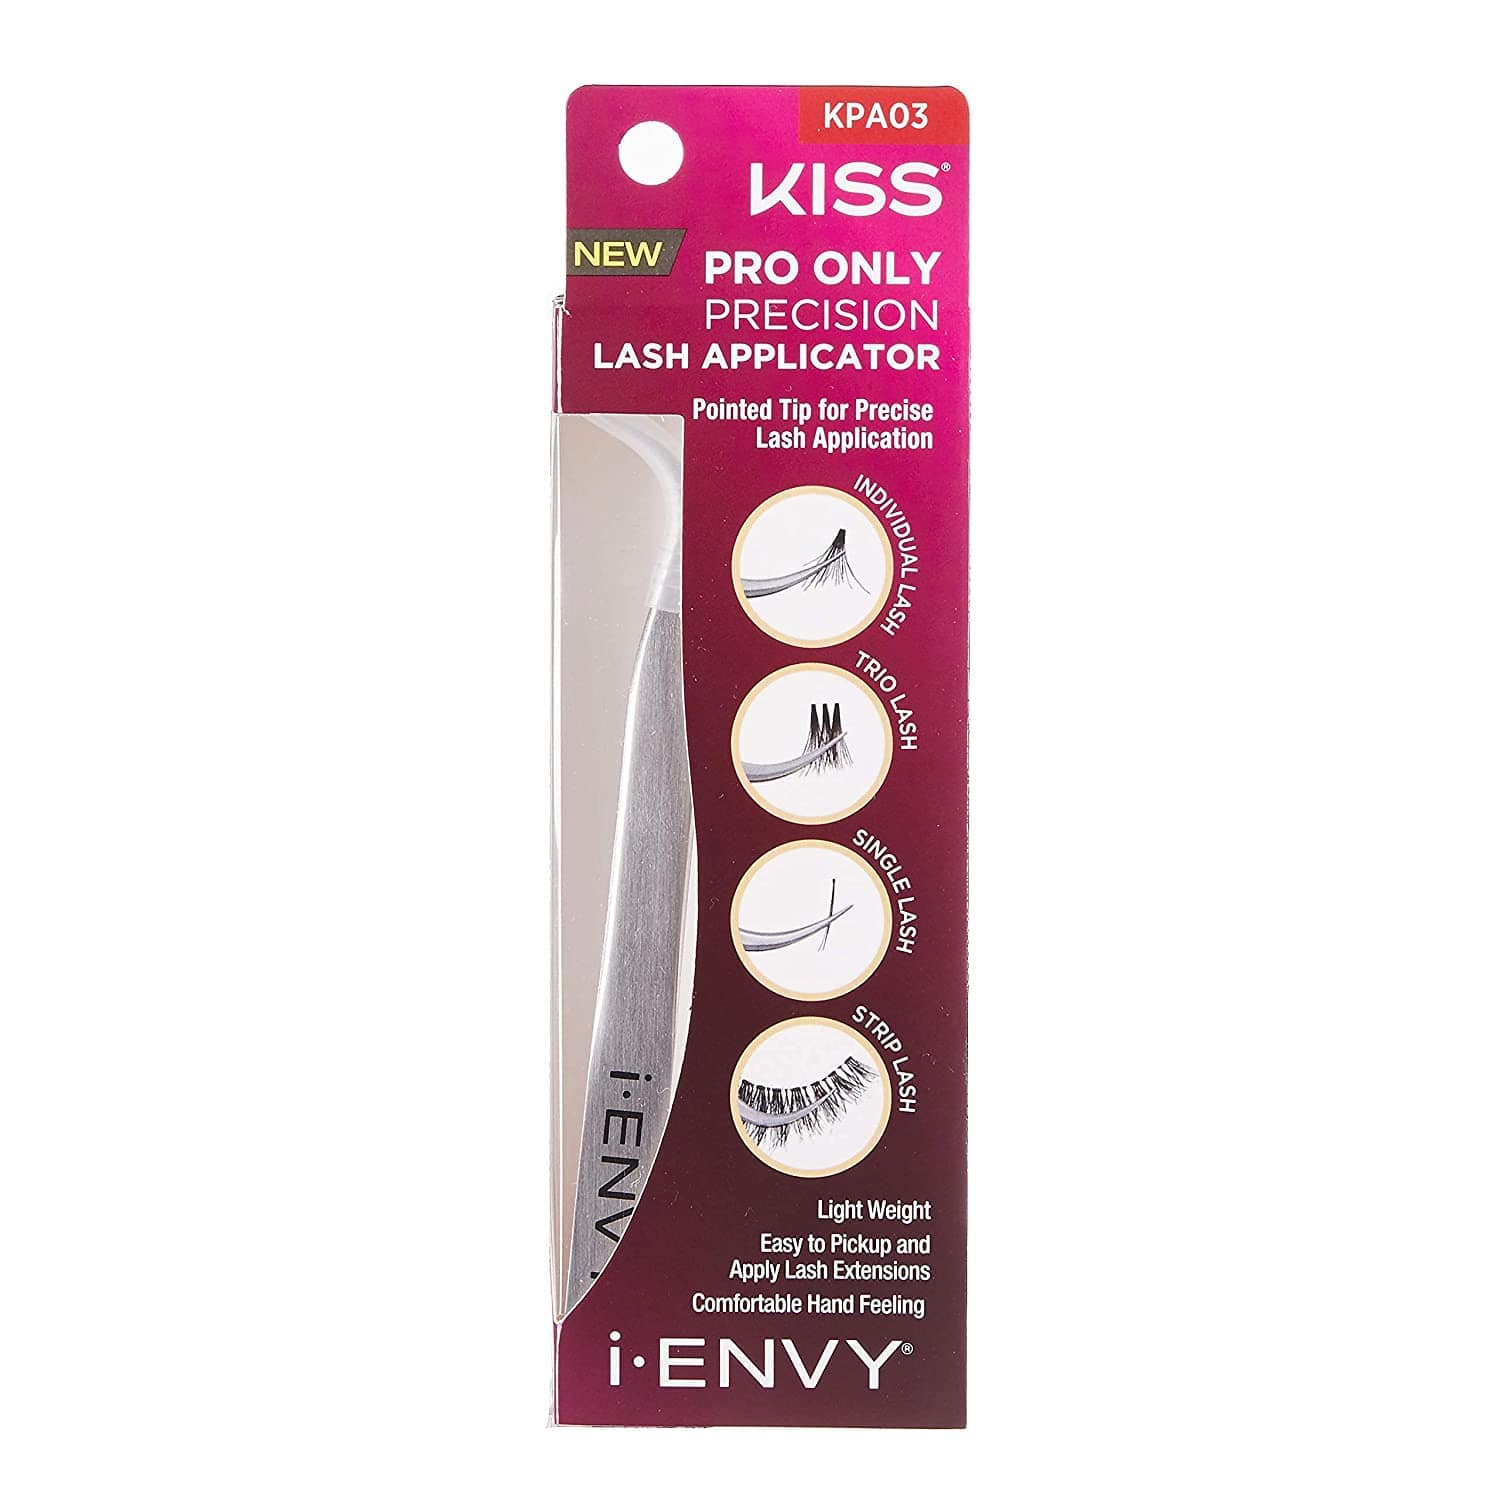 iEnvy by Kiss - Pro Only Precision Lash Applicator (KPA03)